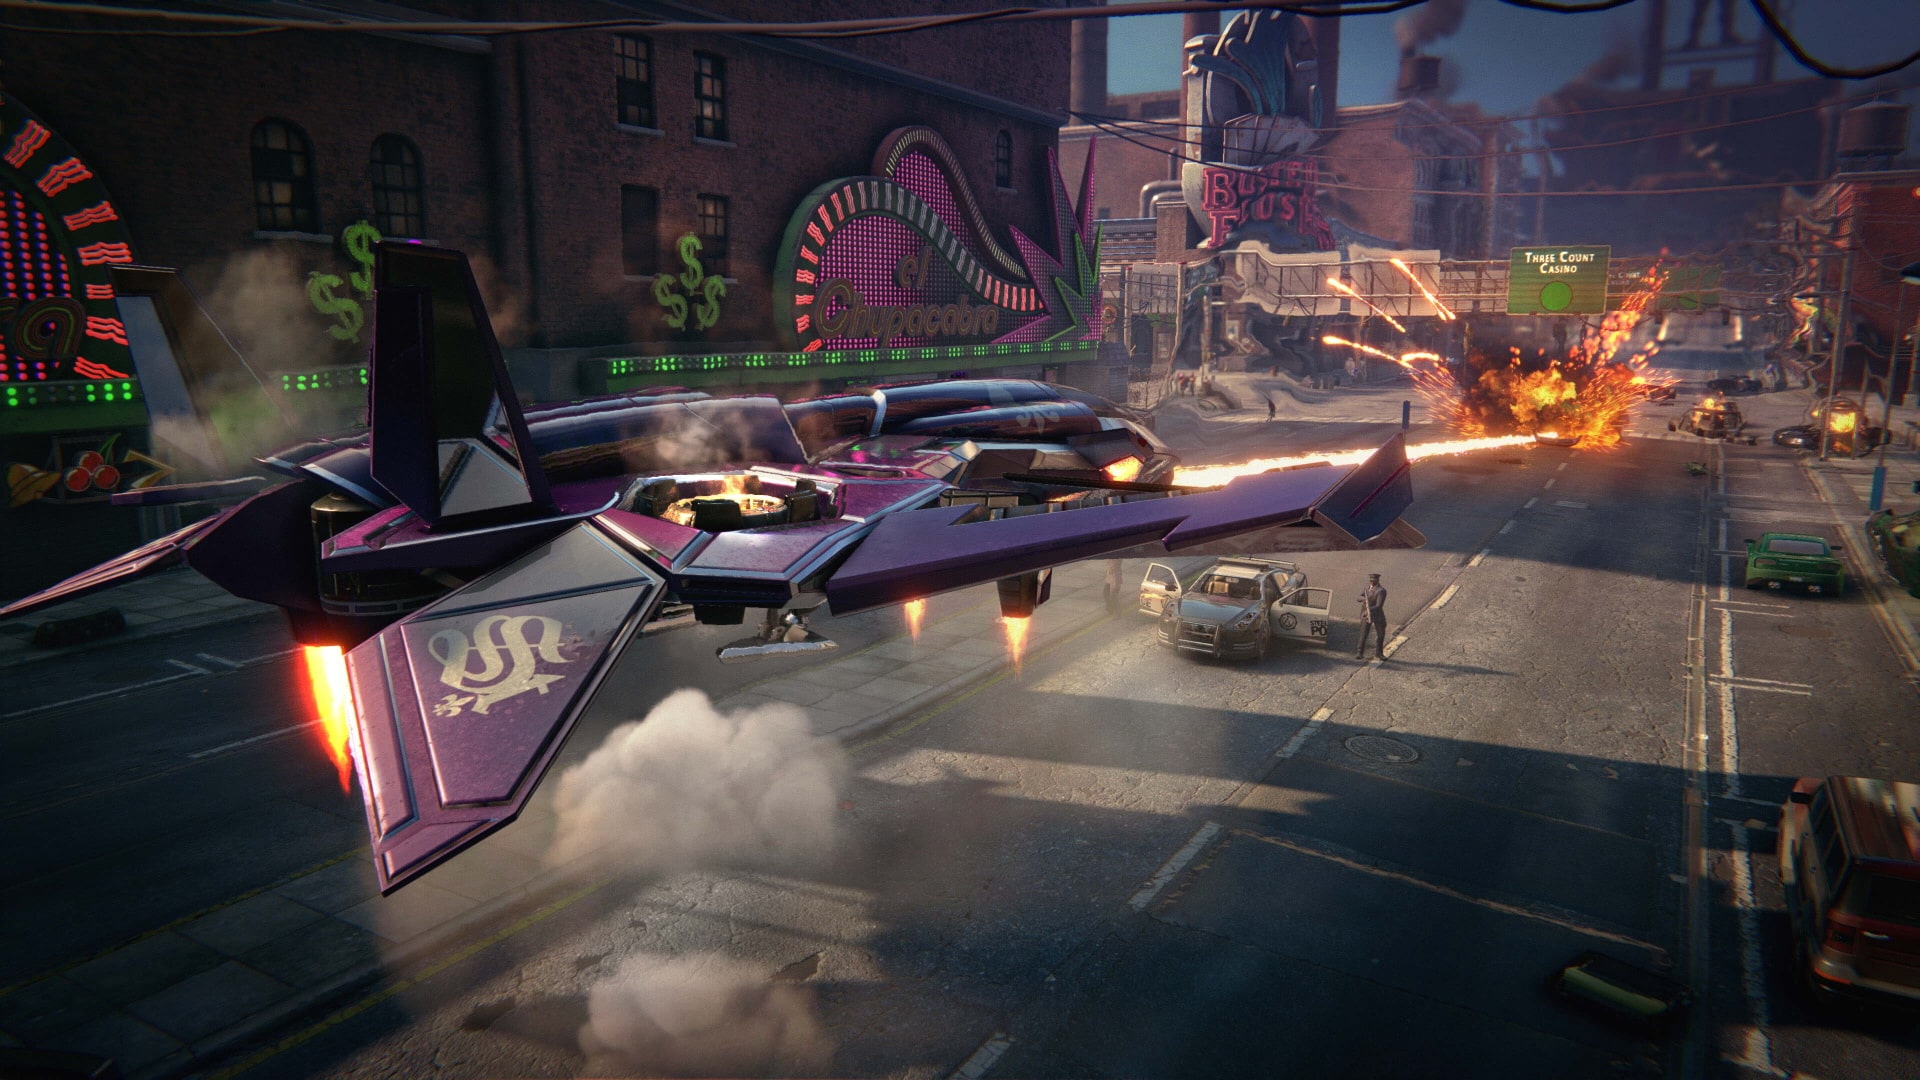 playstation store saints row the third remastered